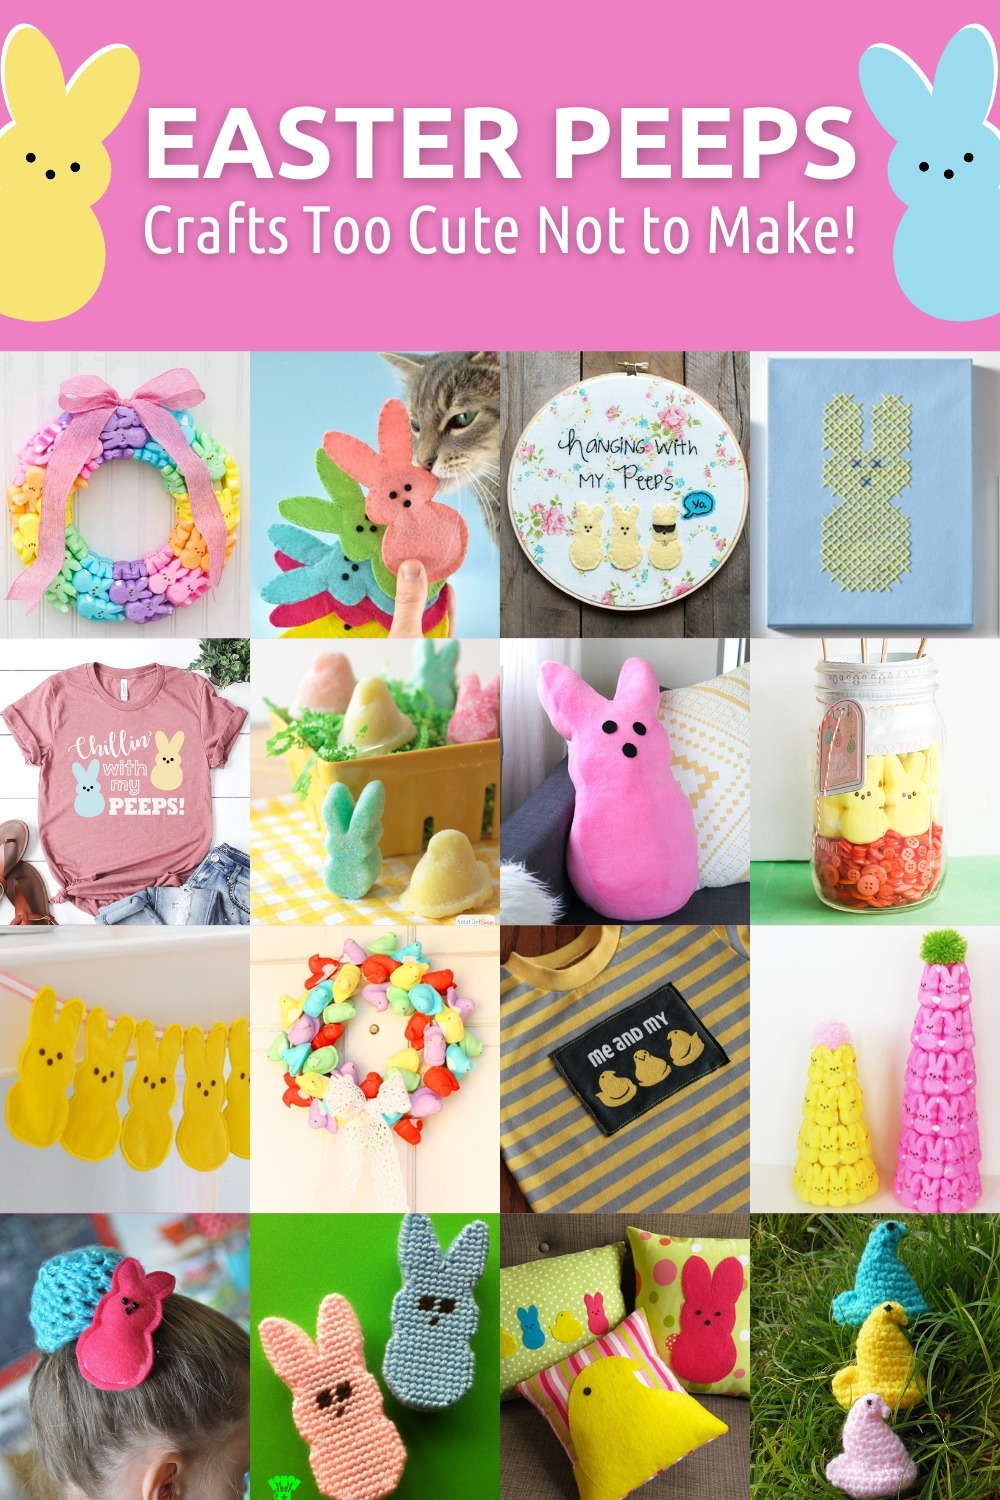 Easter Peeps Crafts Too Cute Not to Make